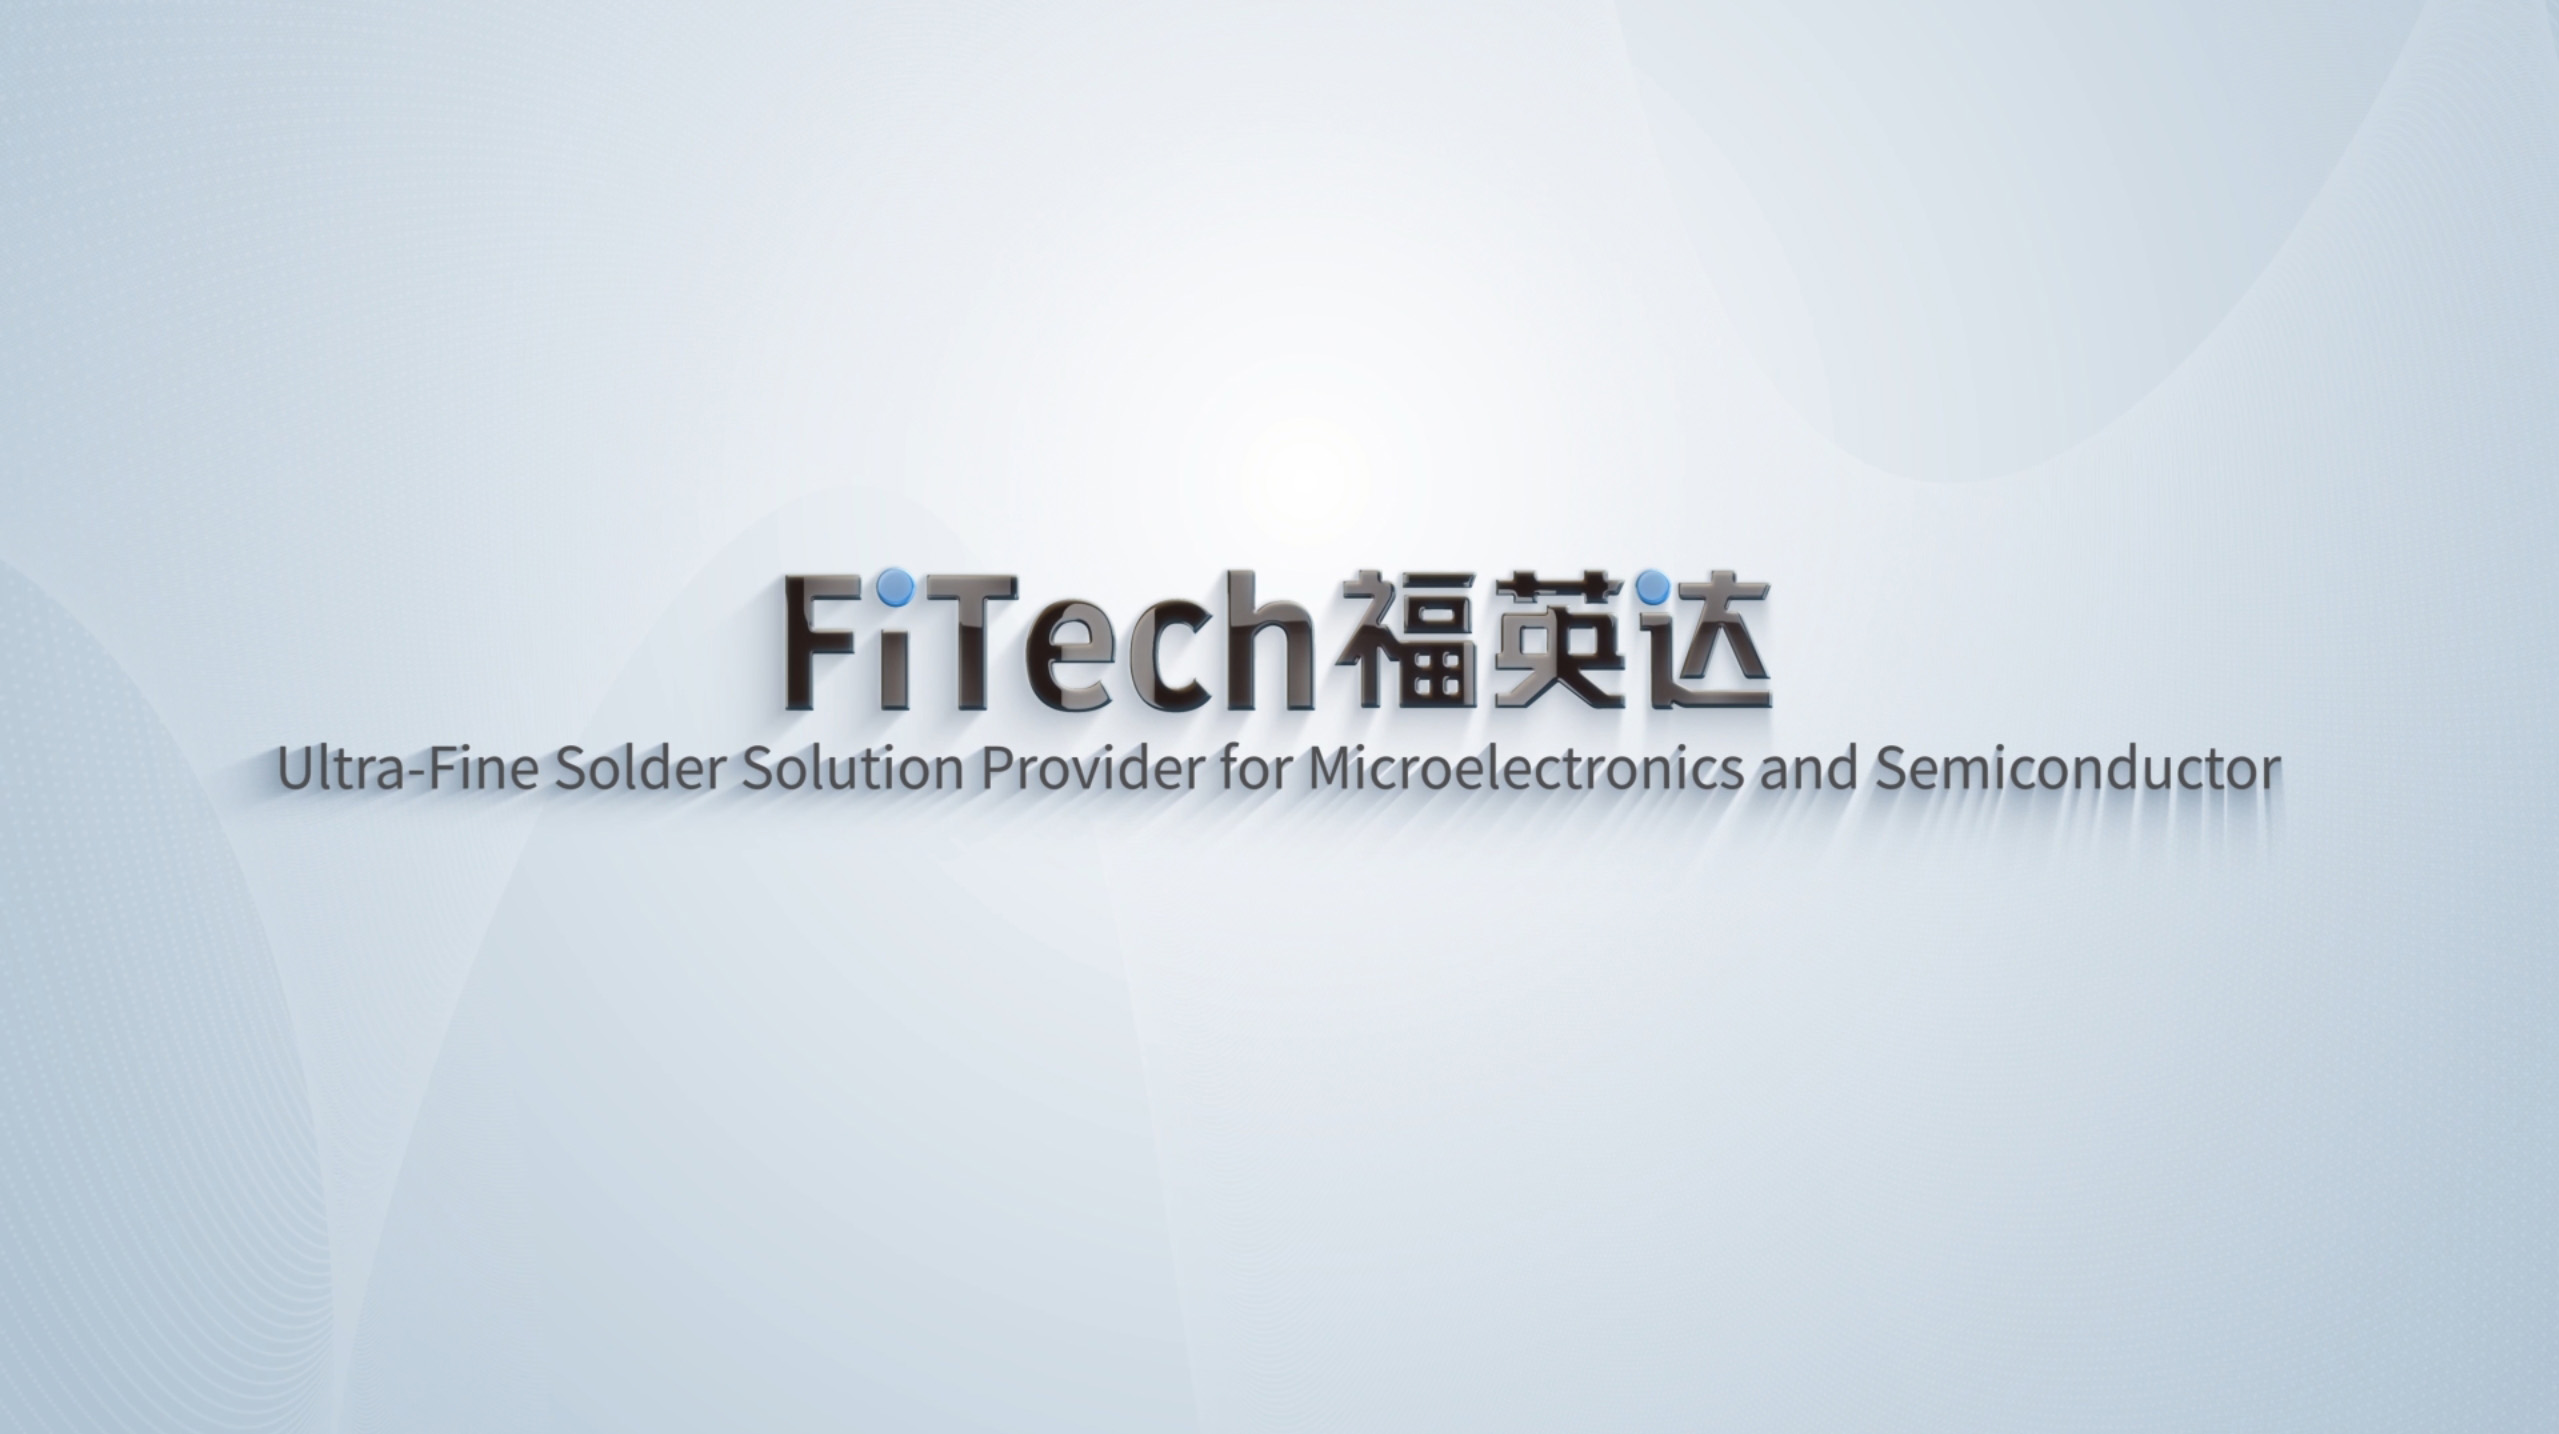 SZ Fitech, a one-stop ultra-micro solder solution provider!